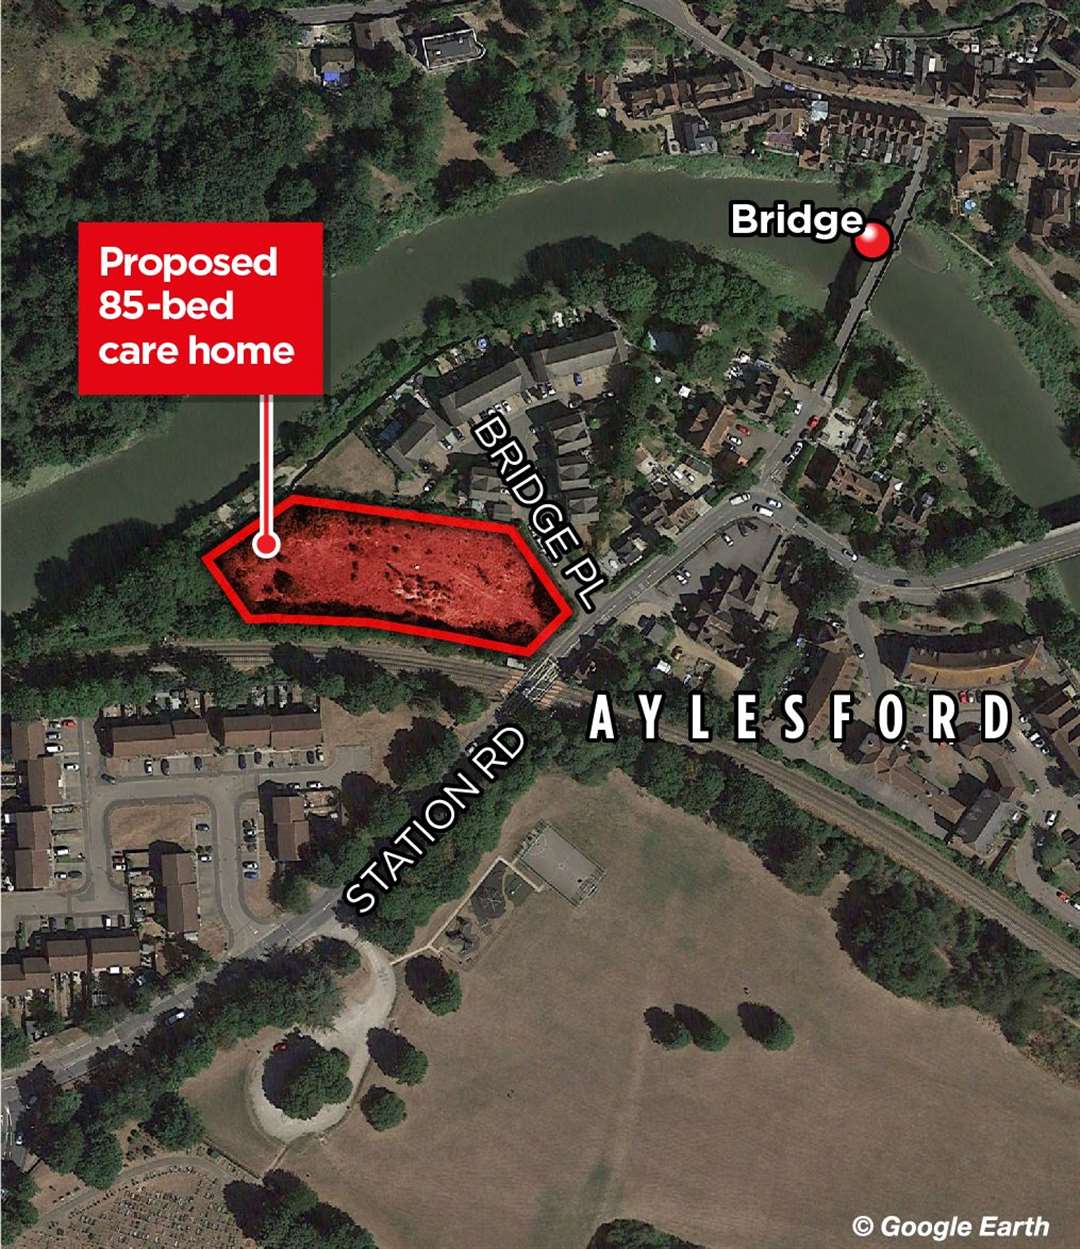 The site of proposed care home in Aylesford